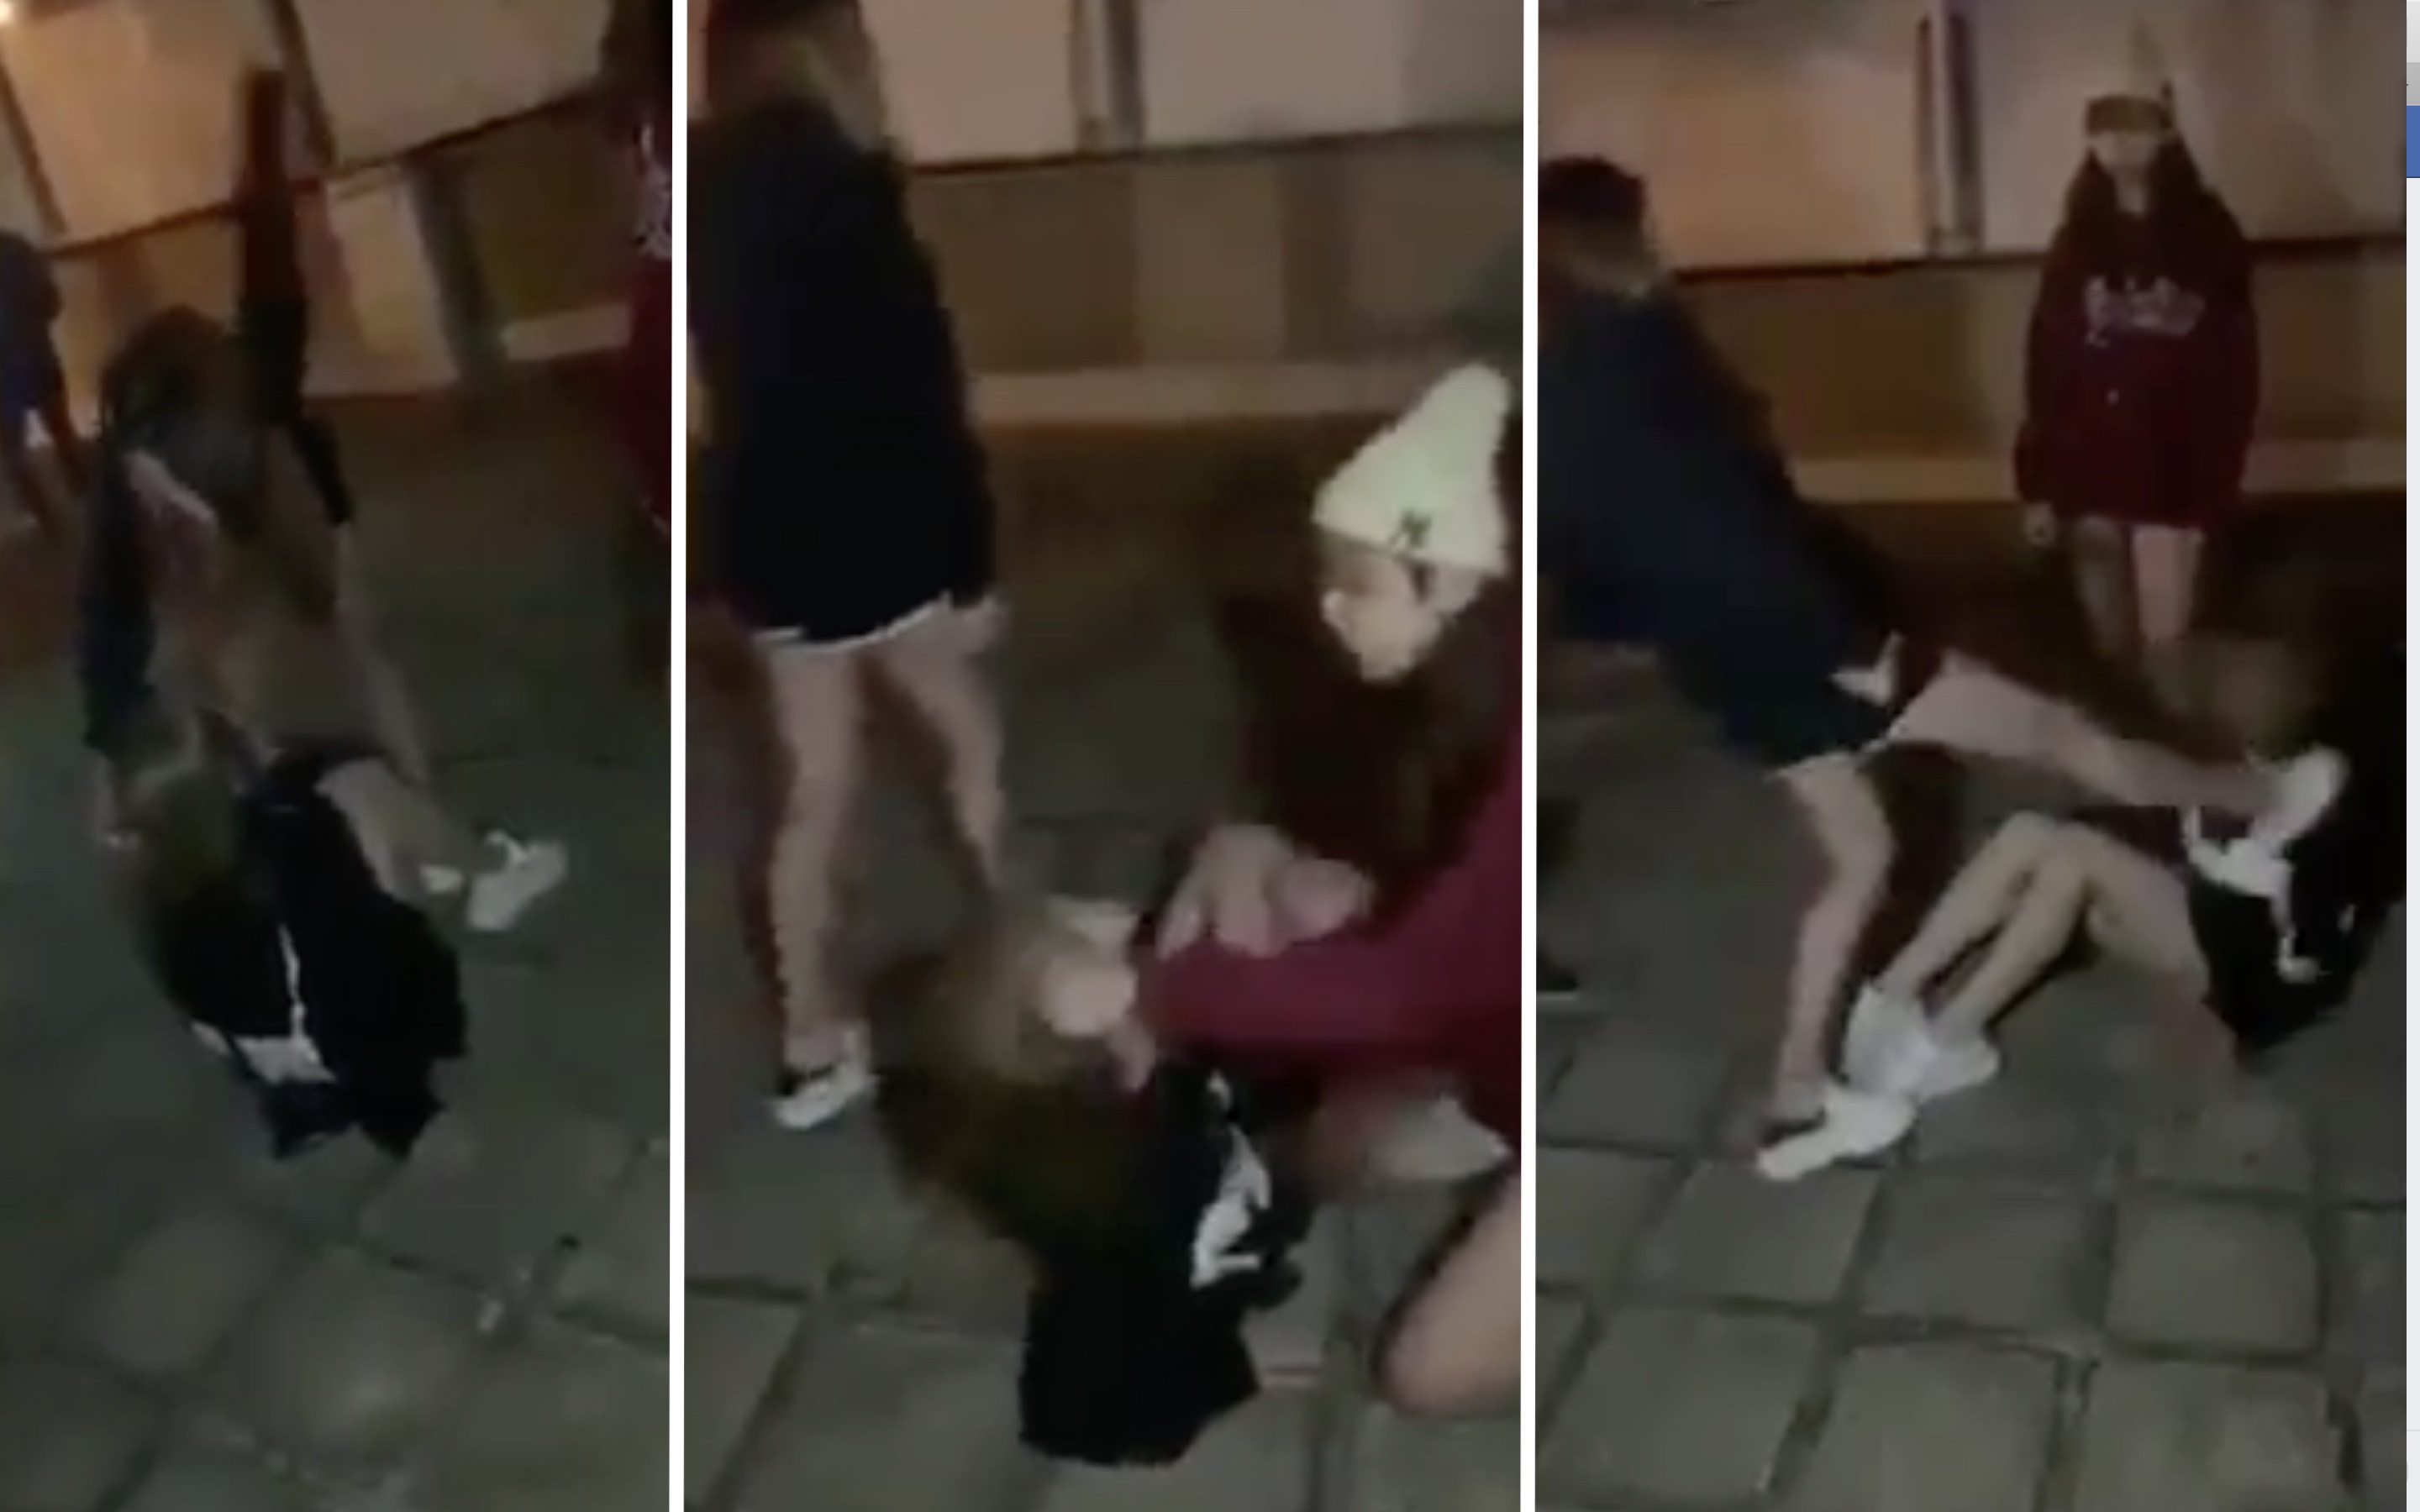 Video posted online shows two women slapping and kicking another woman at least 50 times. Screengrabs via Facebook video.